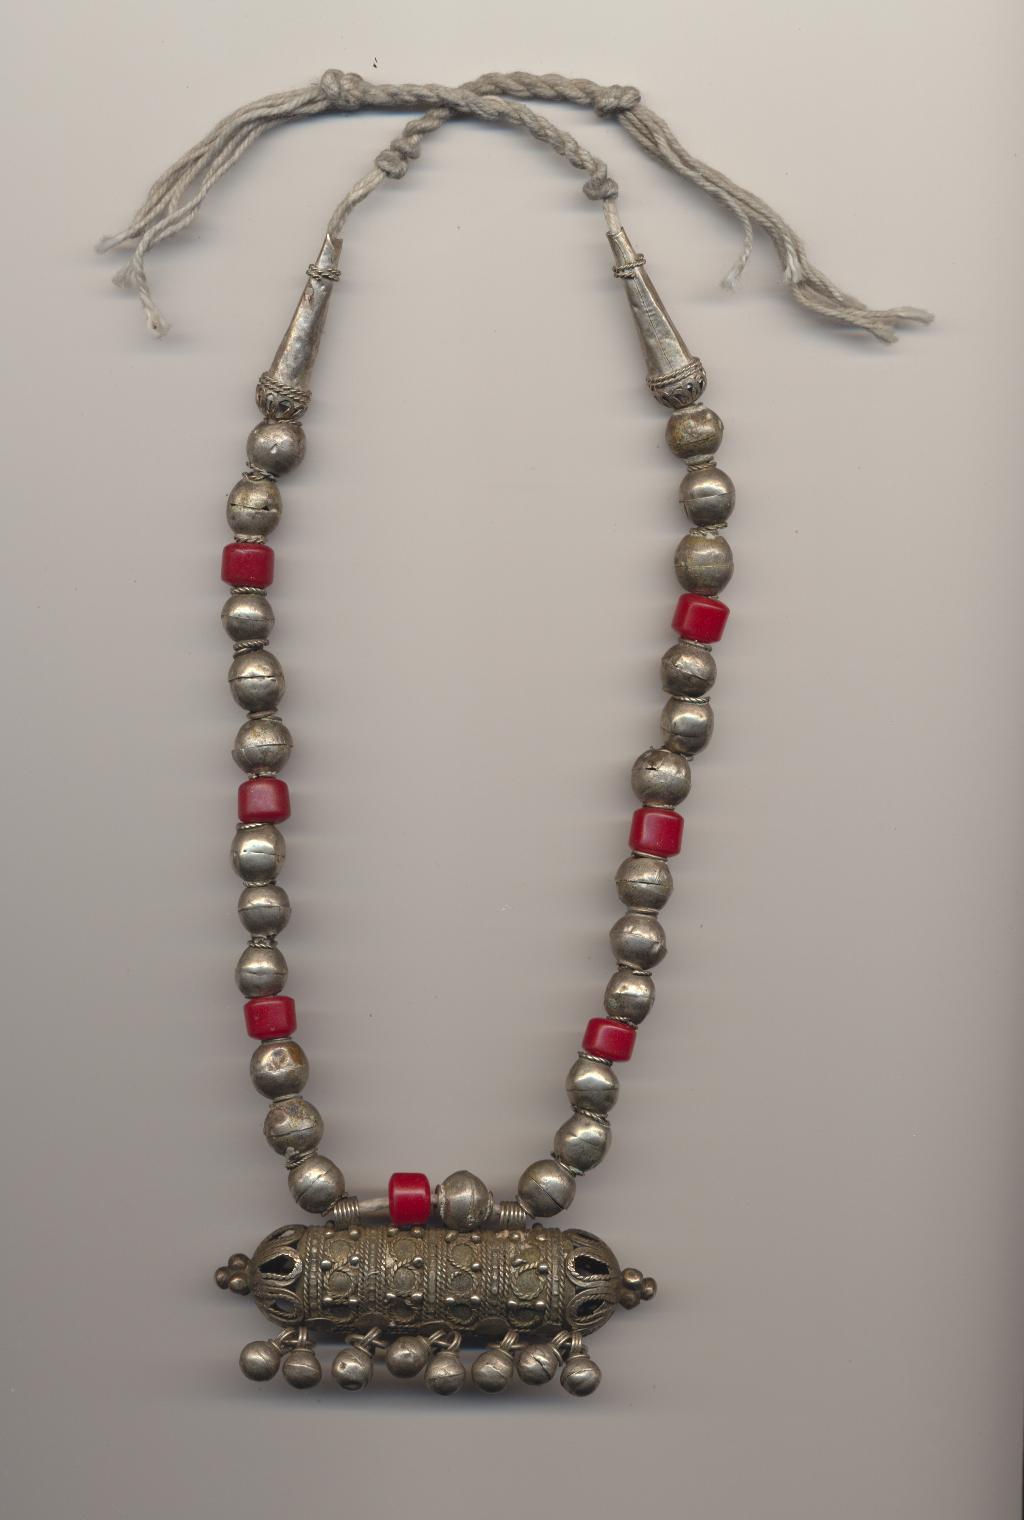 Old Yemeni tribal jewelry necklace with large amulet prayer box, made of silver and small red bakelite beads, ca. 1930's, length 20'' 50cm.